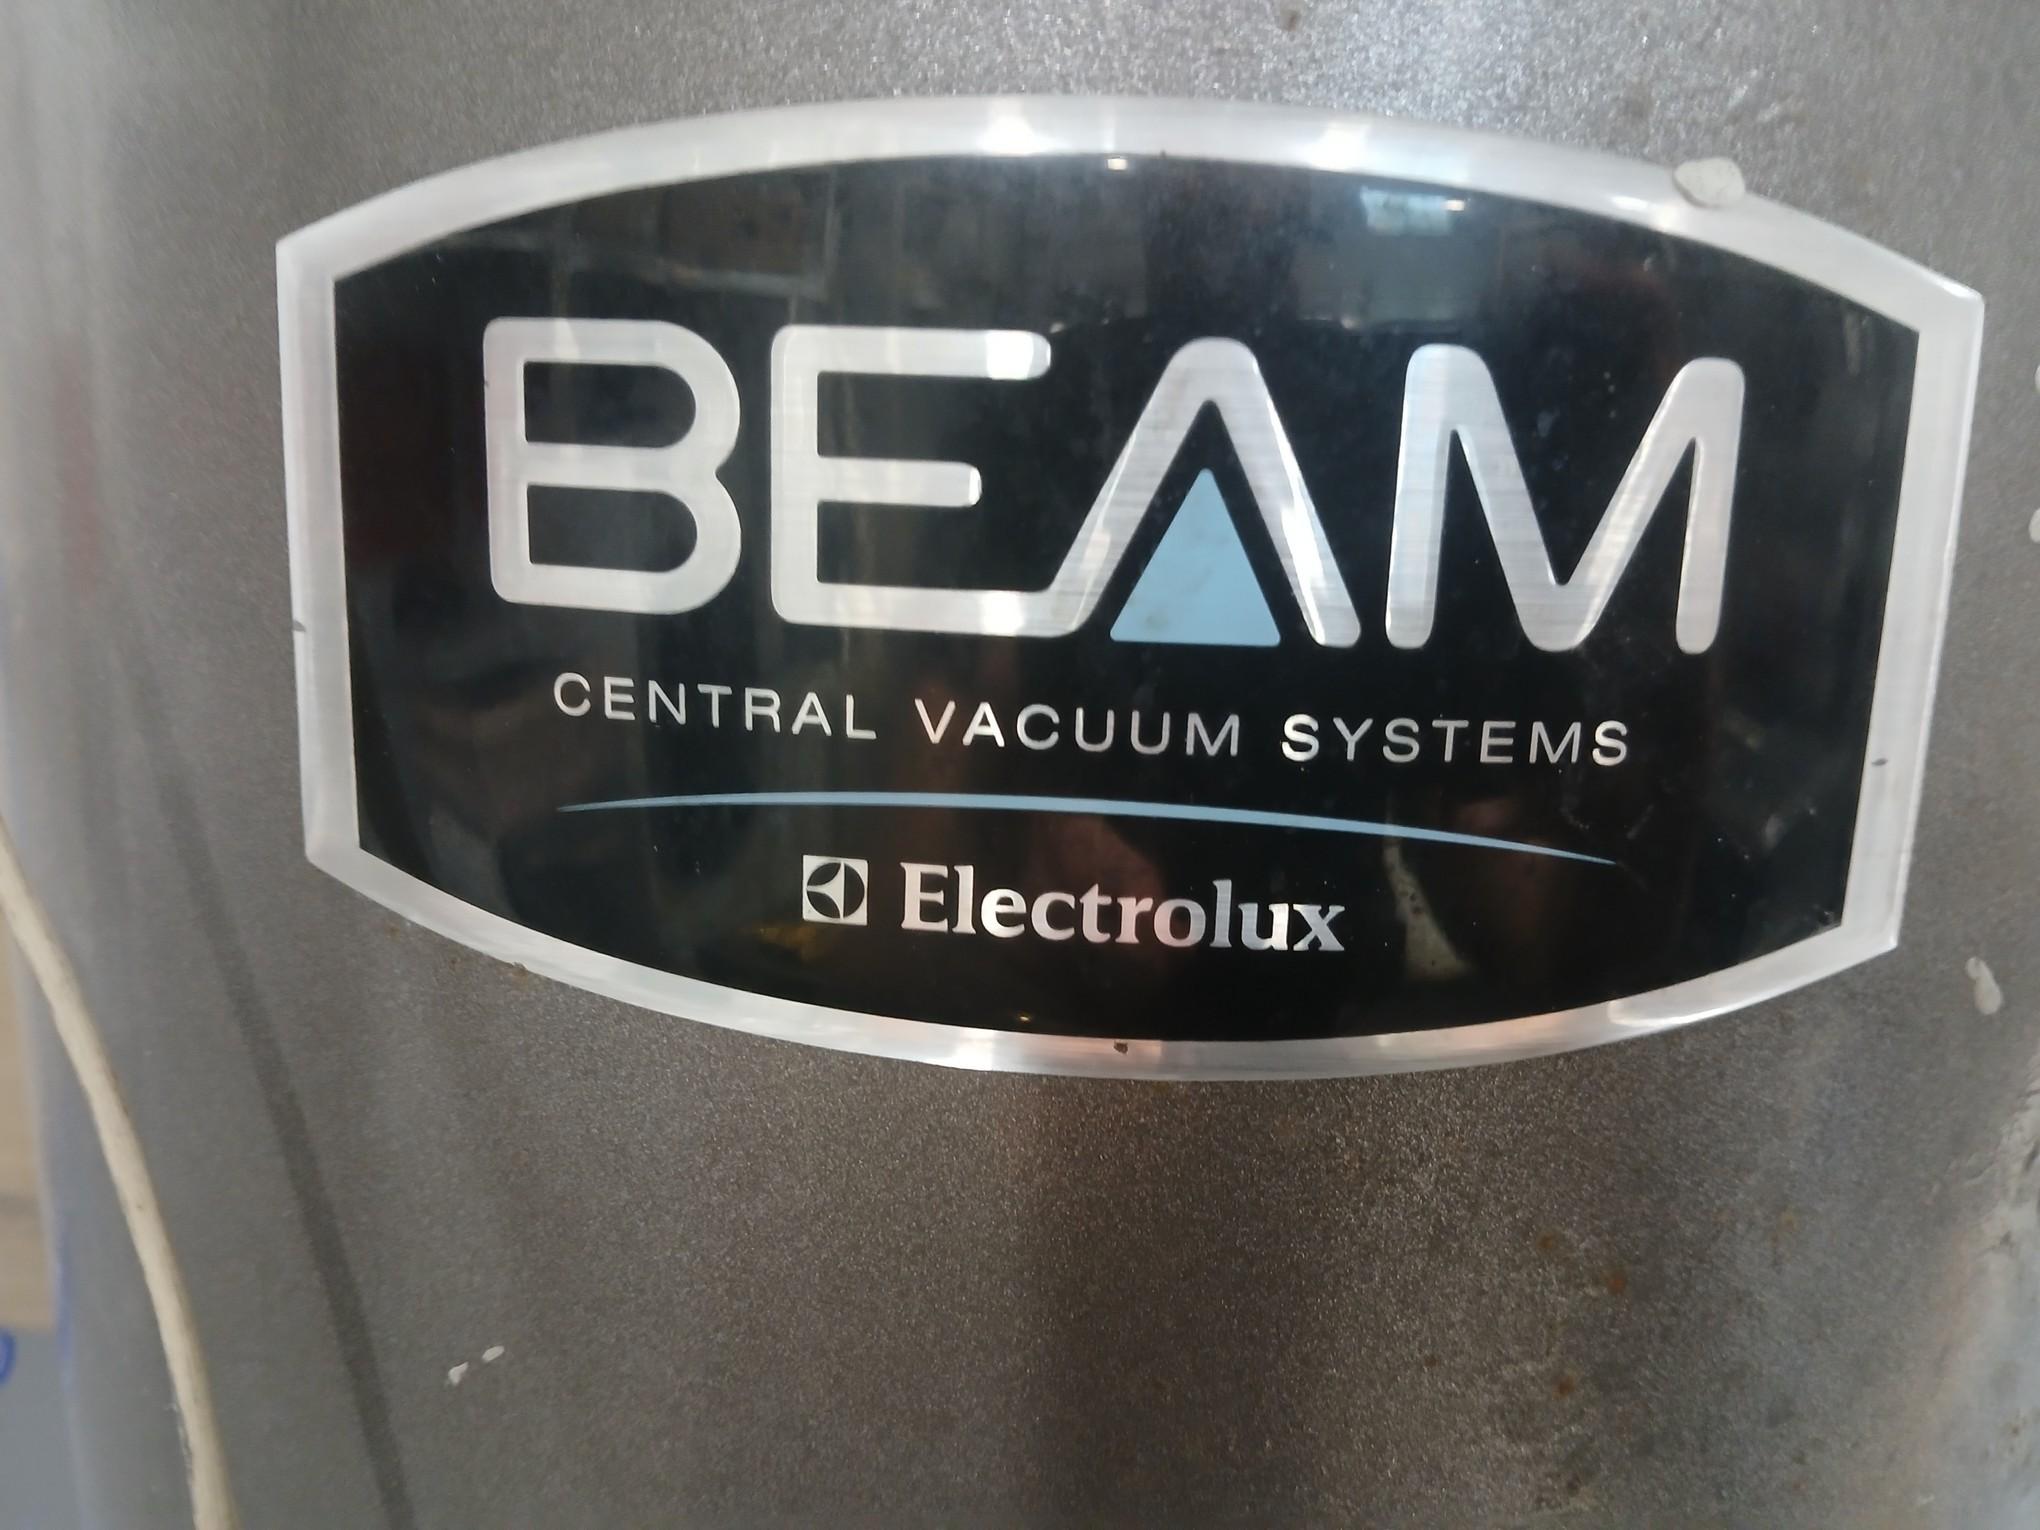 BEAM Central Vacuum System Made by ELECTROLUX Model #SC3500C - The specs to this item are in the pic